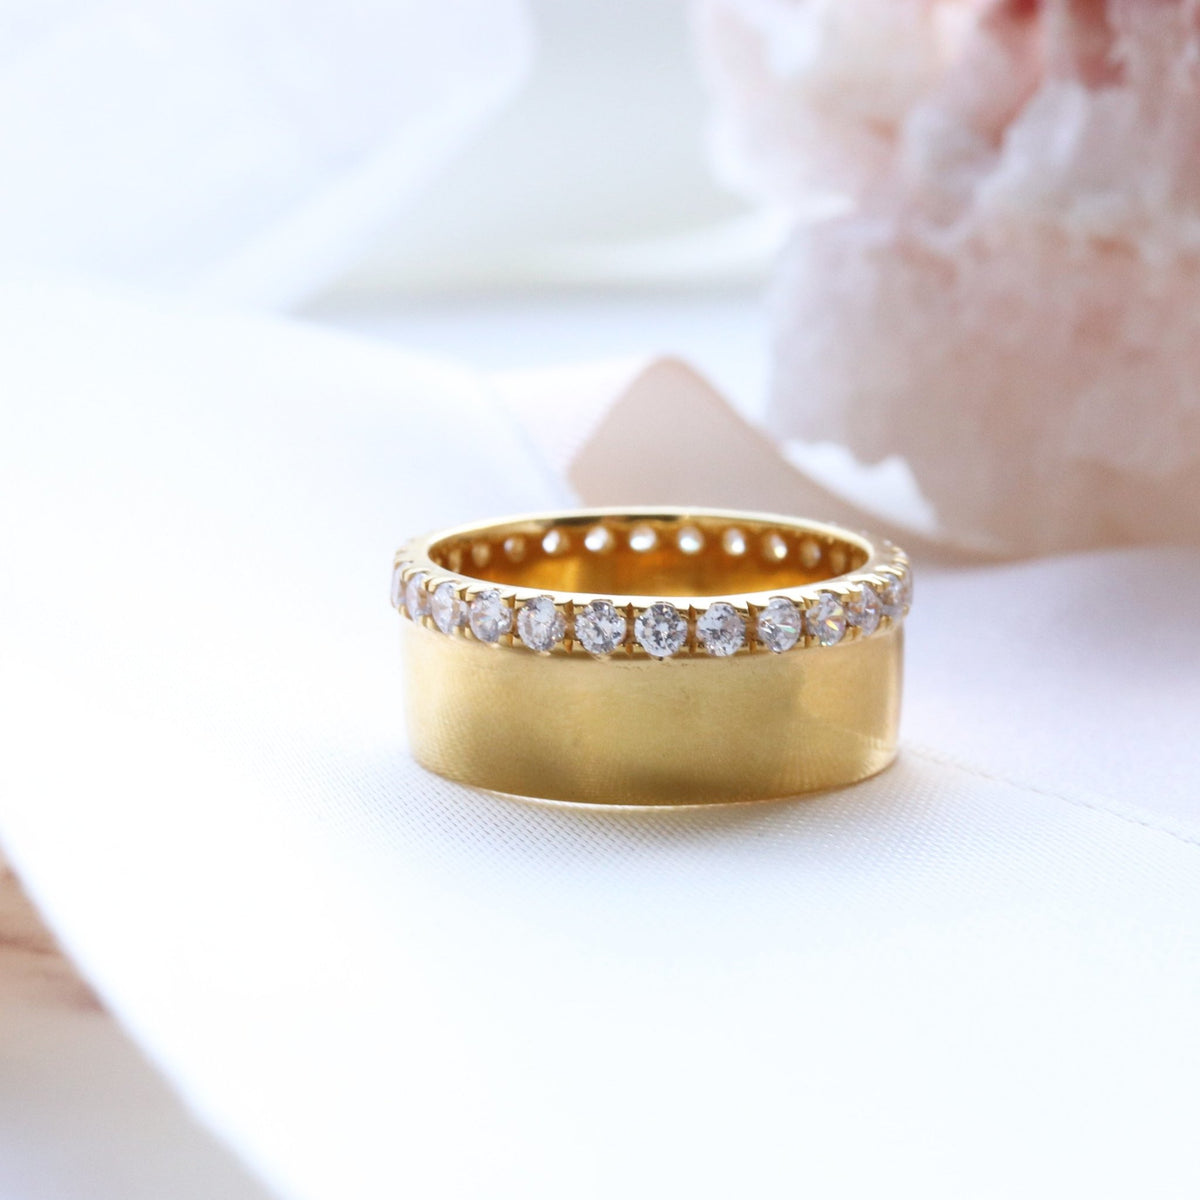 LOVE ETERNITY CIGAR BAND - CUBIC ZIRCONIA &amp; GOLD - SO PRETTY CARA COTTER